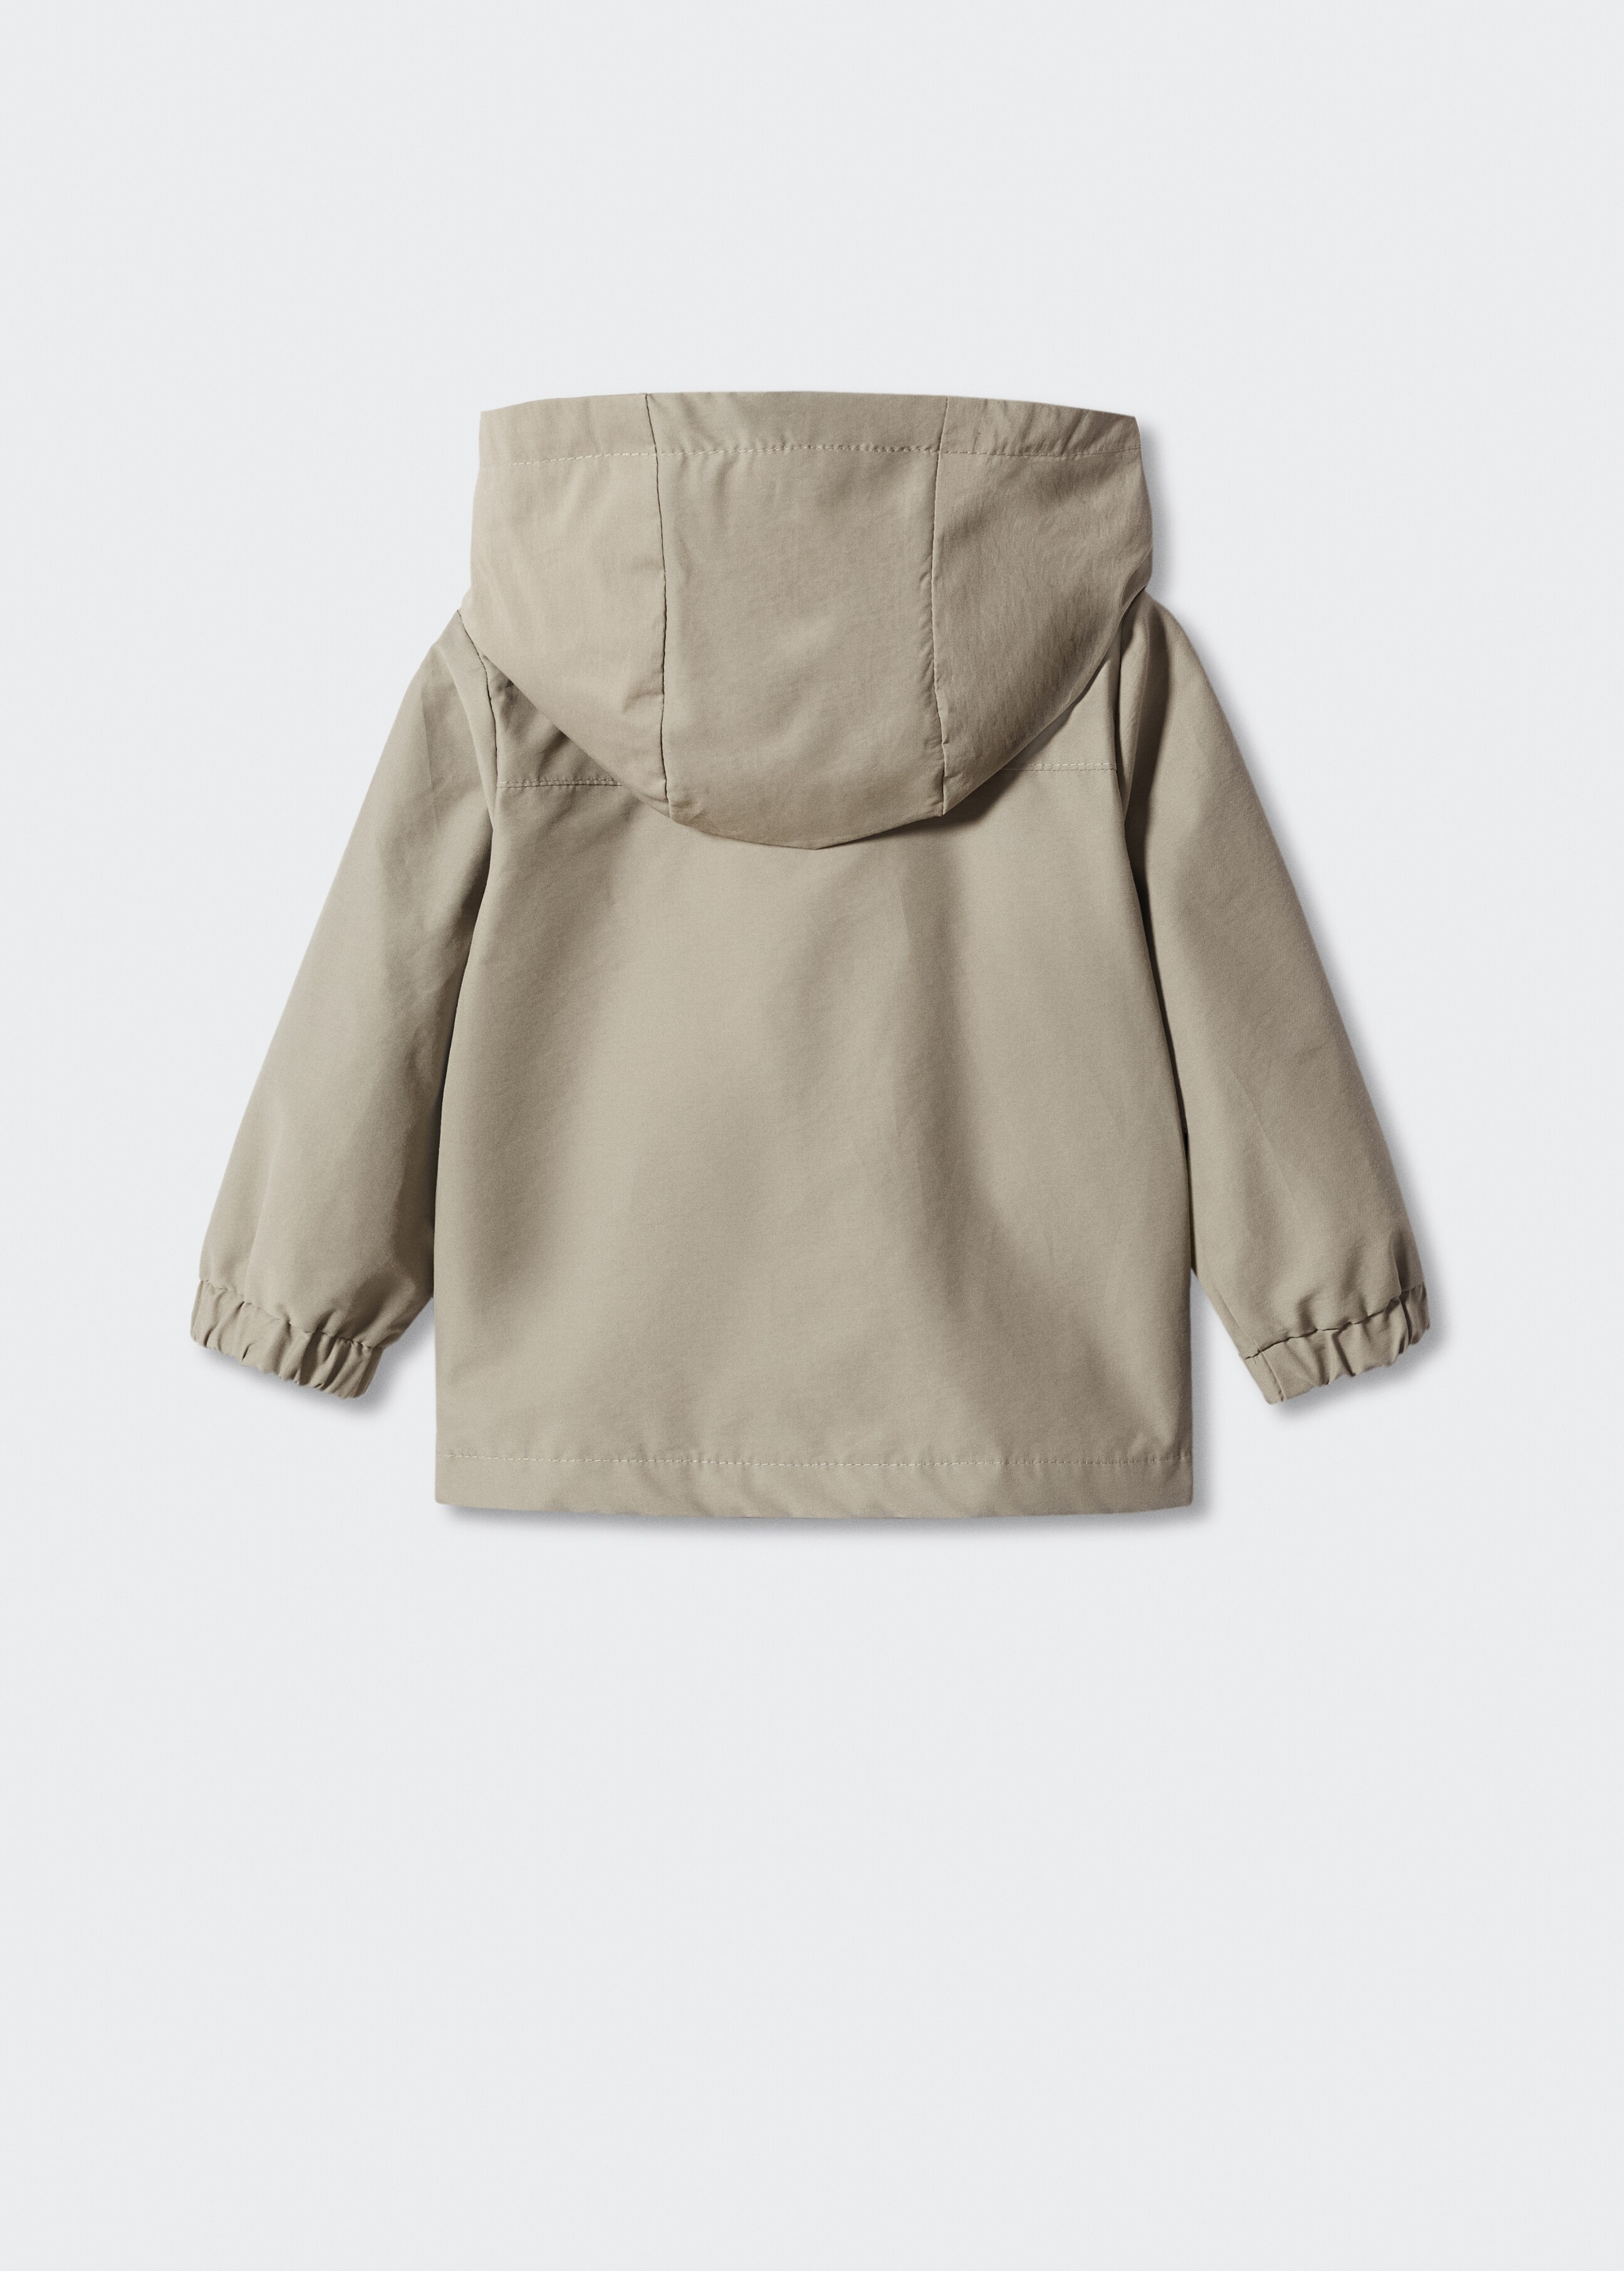 Pocket parka - Reverse of the article